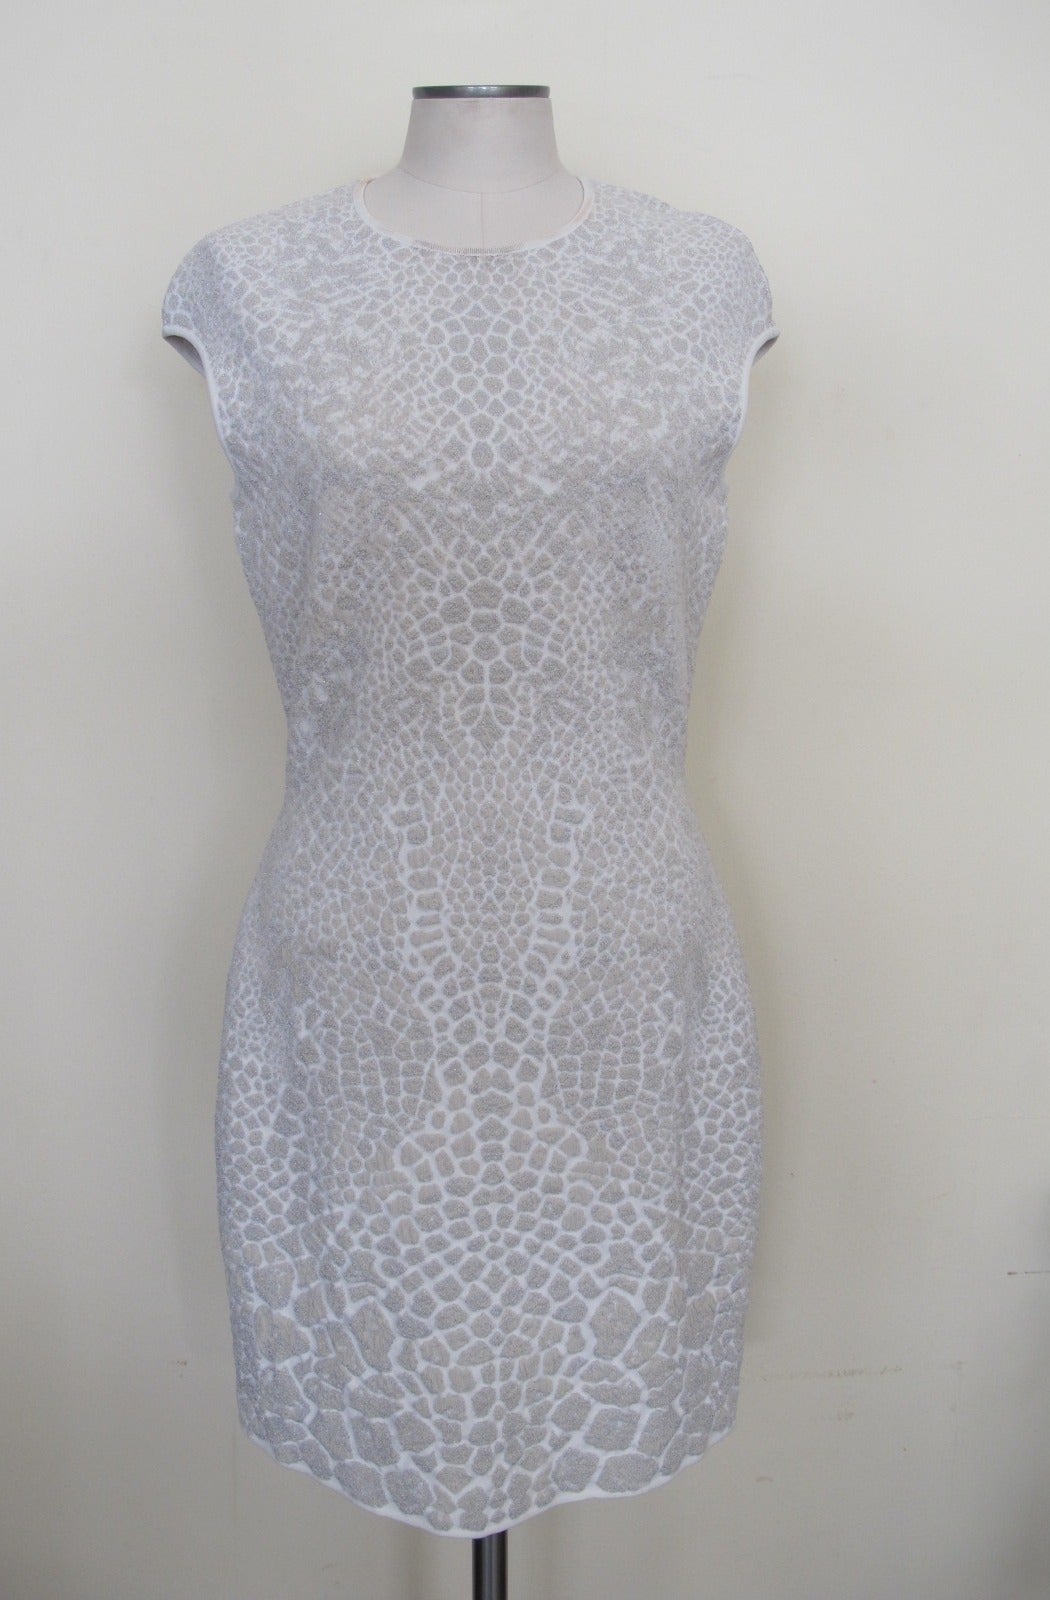 Fabulous new Alexander McQueen snow cheetah patterned dress. The dress is perfect for day or evening. The stretch fabric contribute to the beauty of the figure. Shoulder to shoulder is 21 inches.